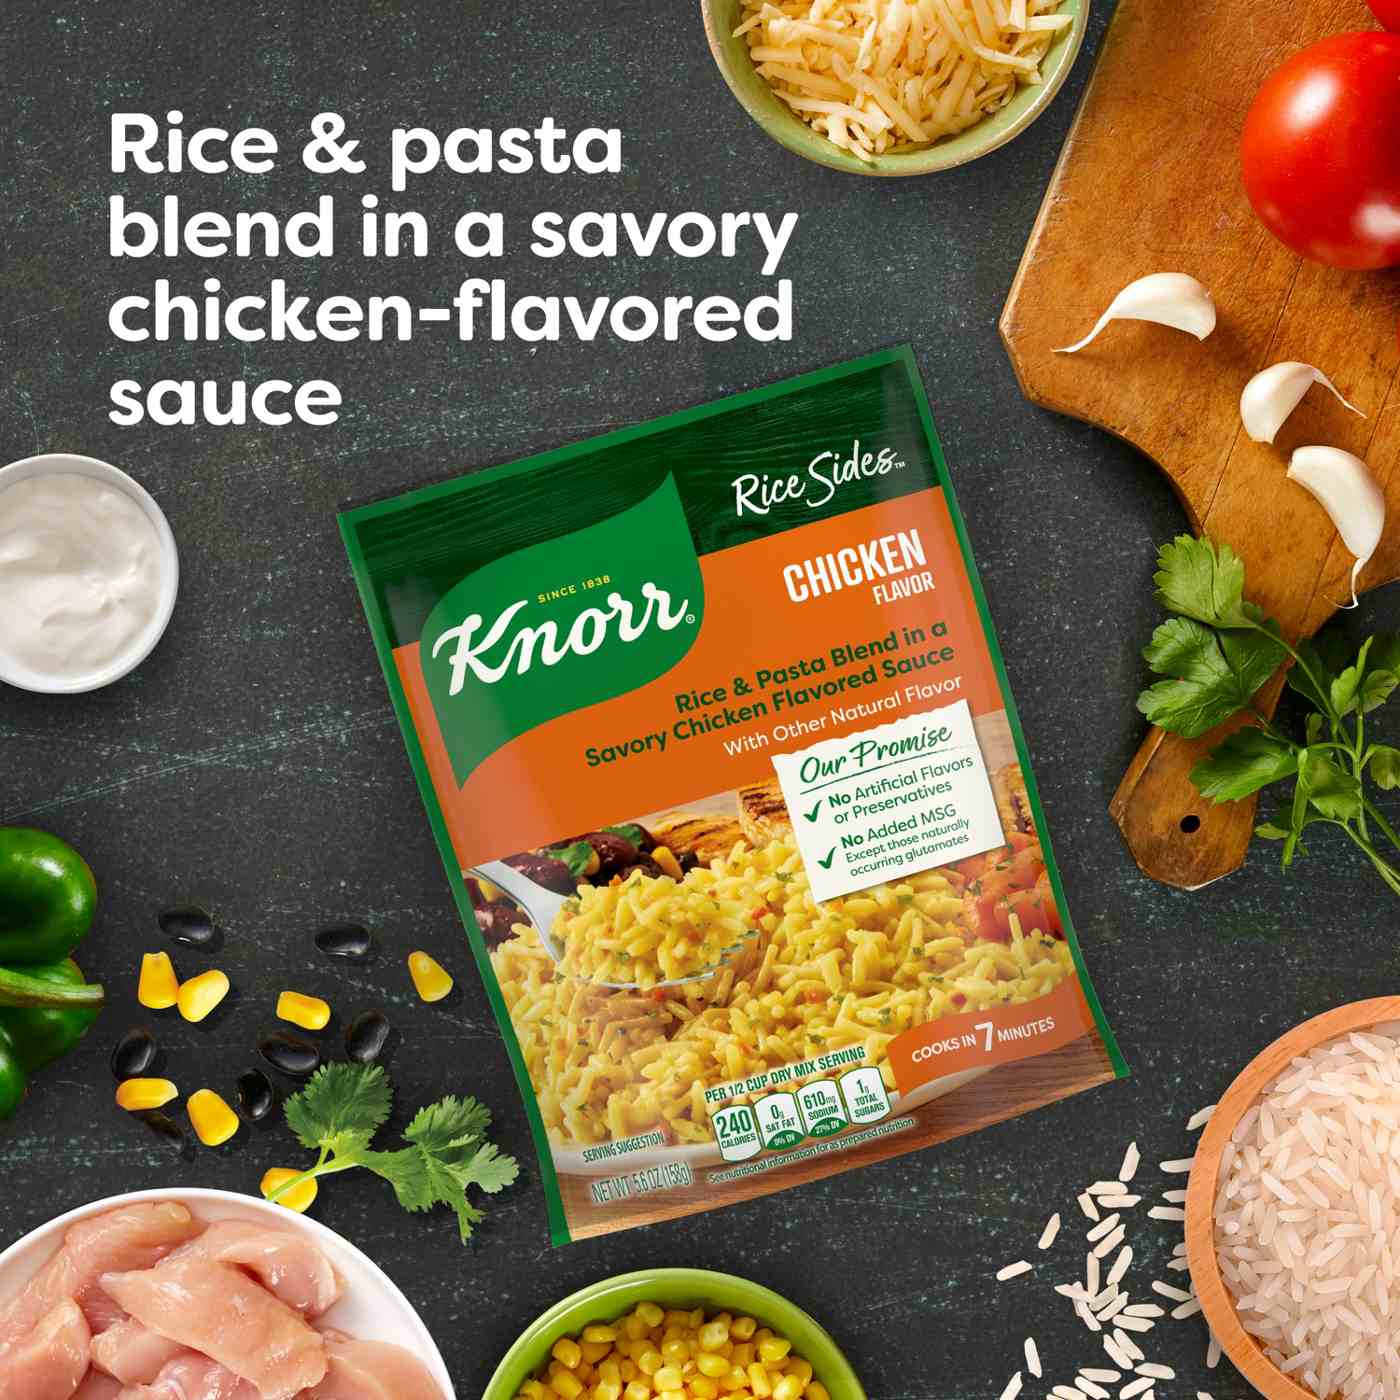 Knorr Rice Sides Chicken Long Grain Rice and Vermicelli Pasta Blend; image 9 of 9